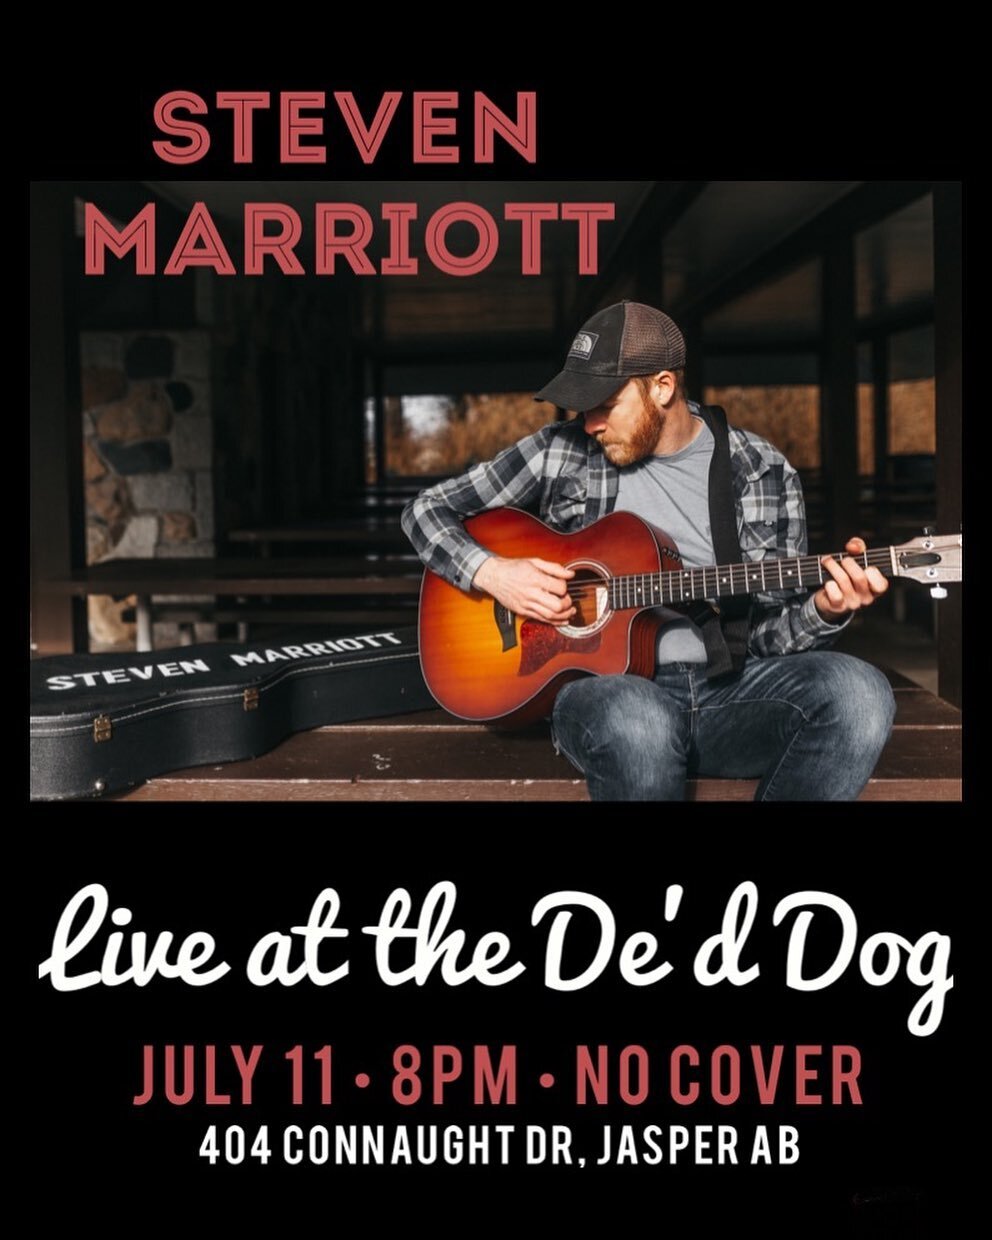 Monday, July 11th

De&rsquo;d Dog welcomes @stevenmarriottmusic !! 🎶

Show starts at 8!